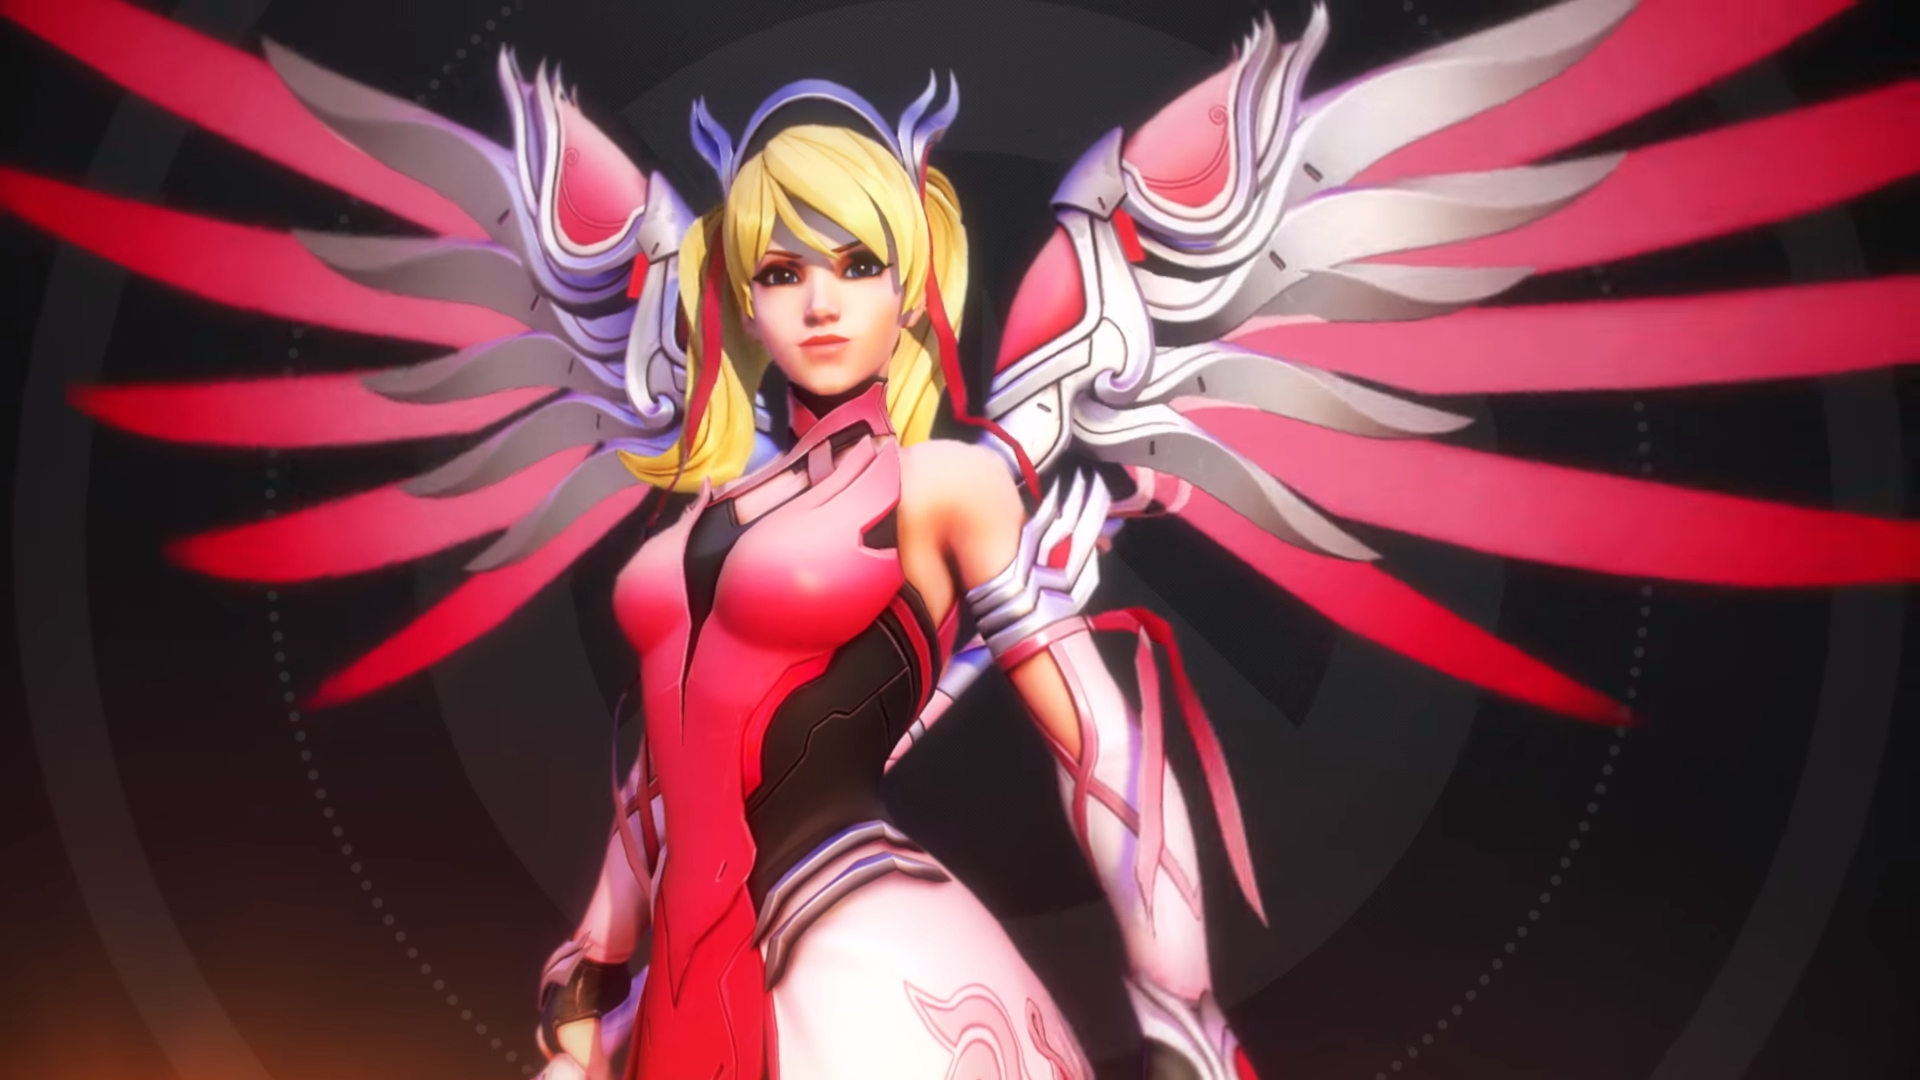 Overwatch 2 is now a dating sim called AmorWatch